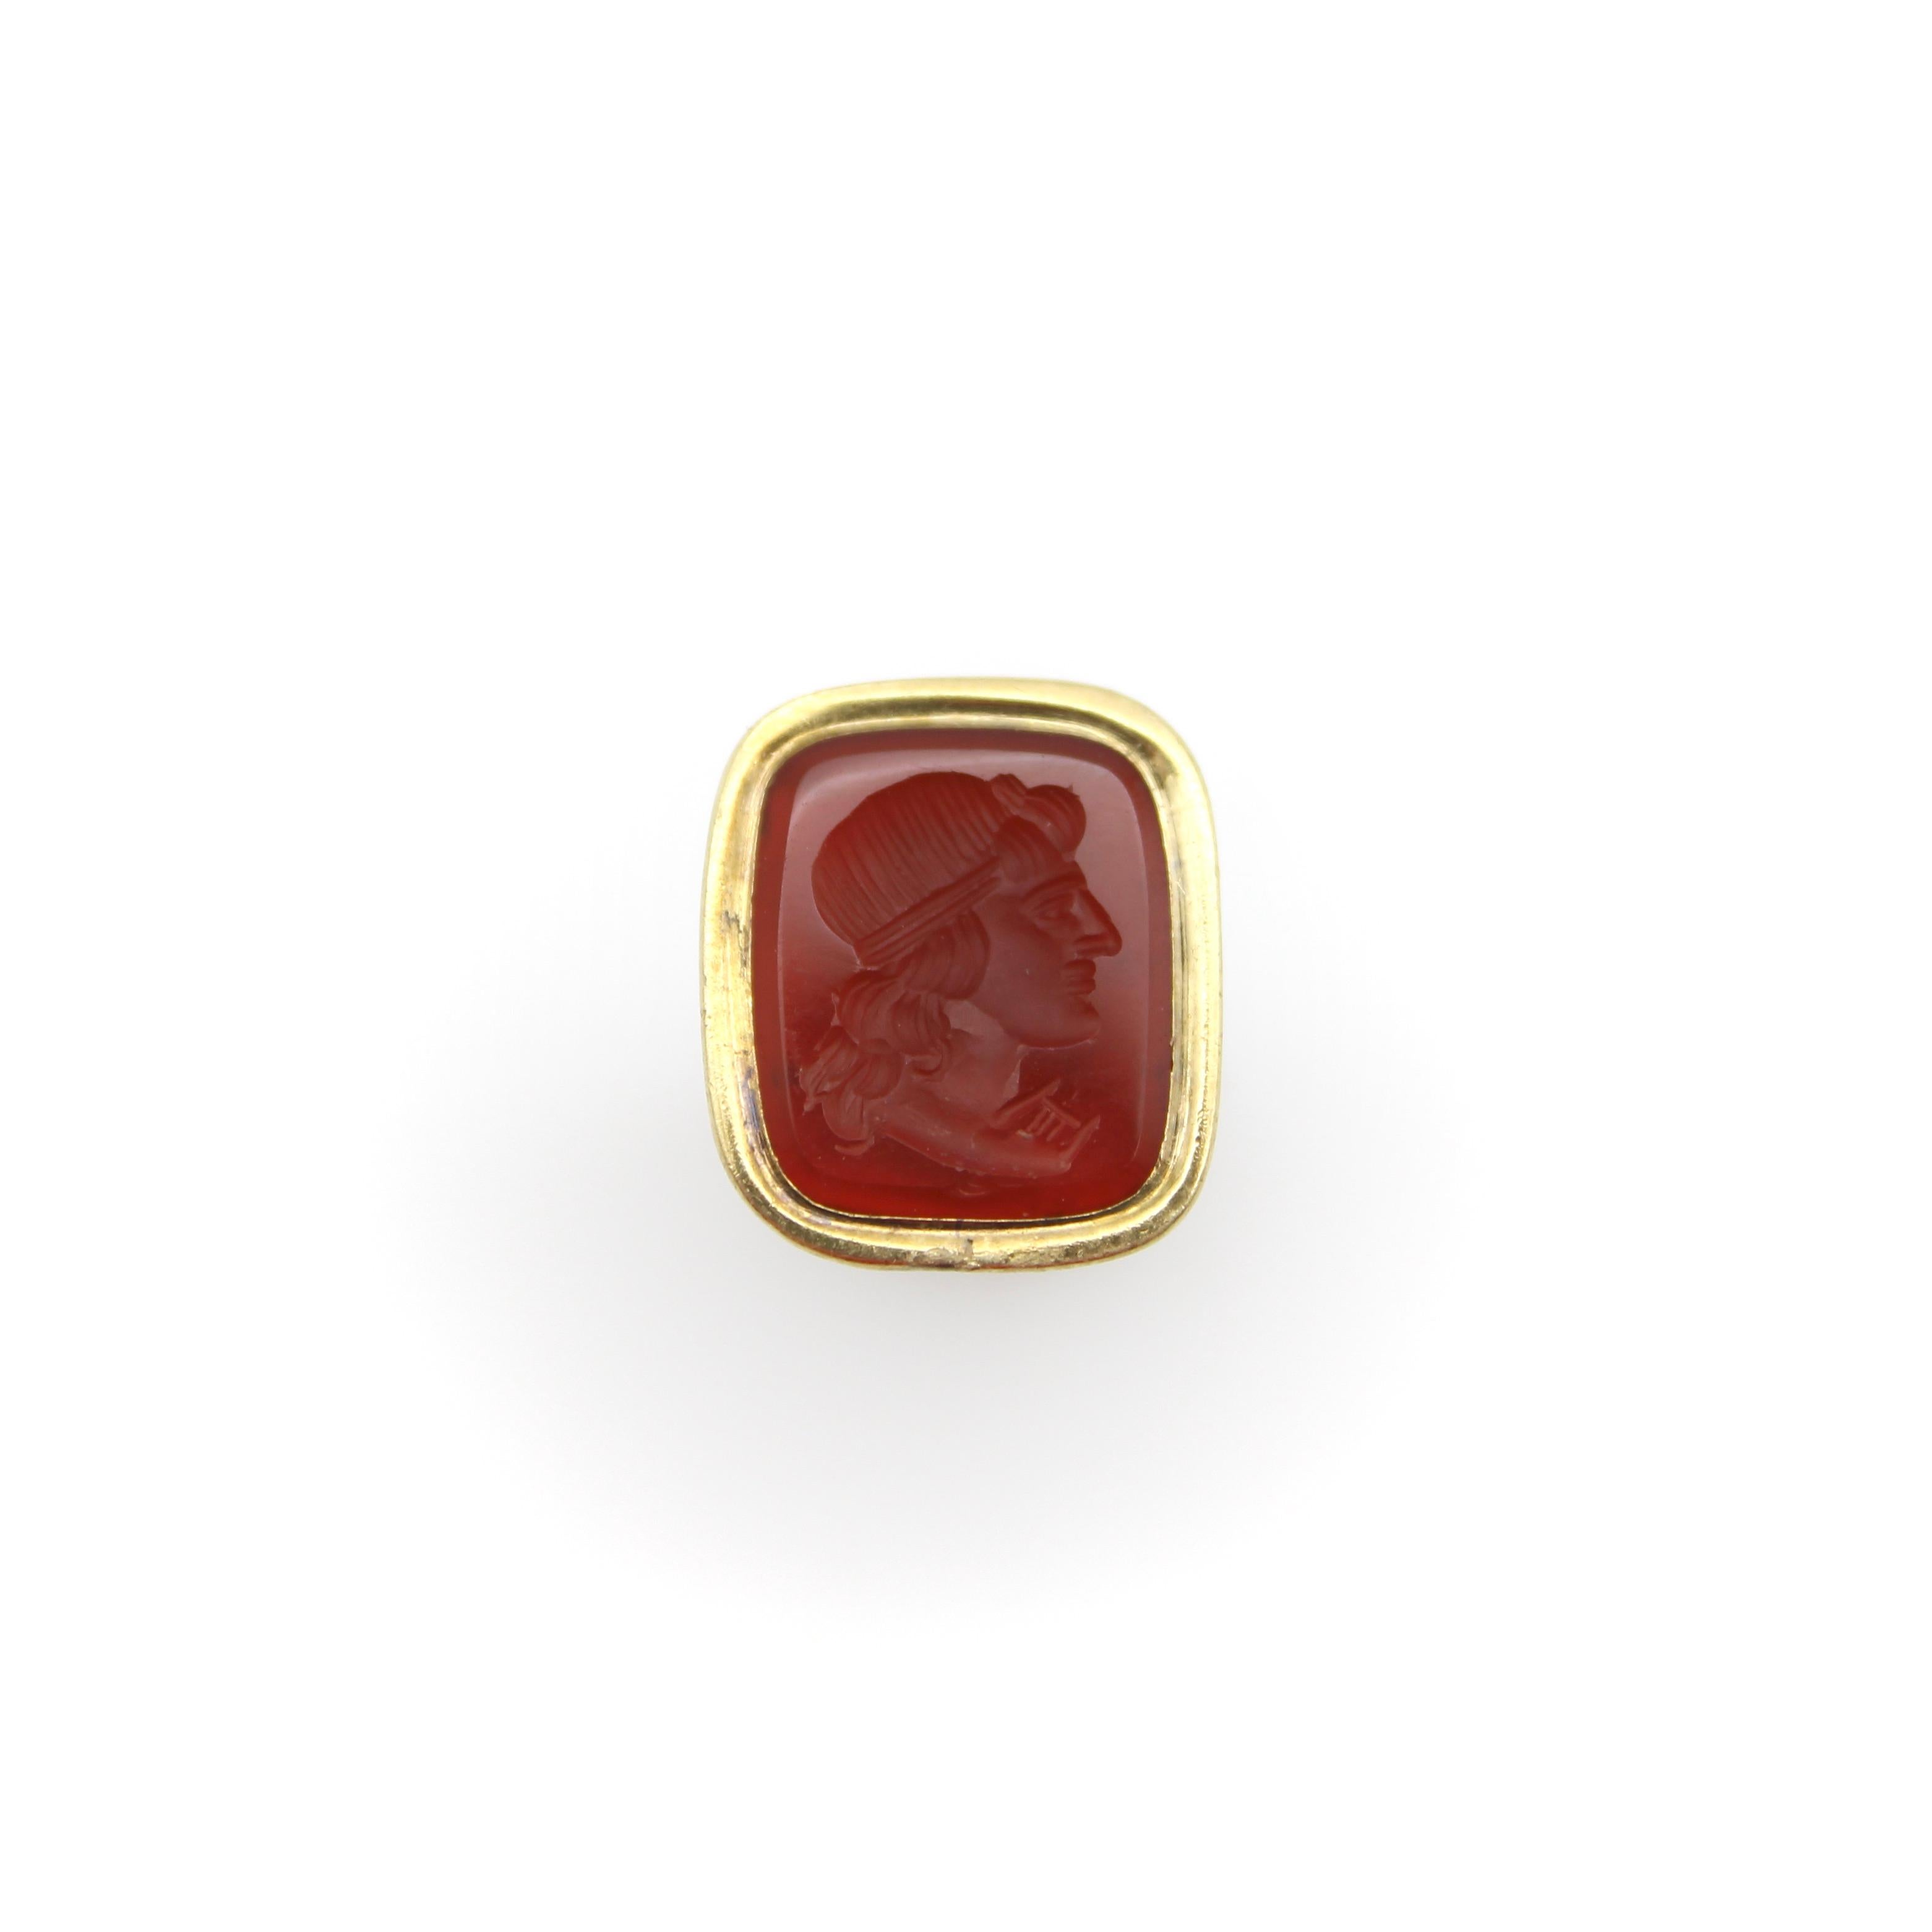 Originally a watch fob, this unique Victorian era antique can also be worn as a fashionable pendant. The fob is 12k gold-cased and features a carnelian gemstone, carved with an intaglio depicting a portrait of a mans profile. Traditionally, during